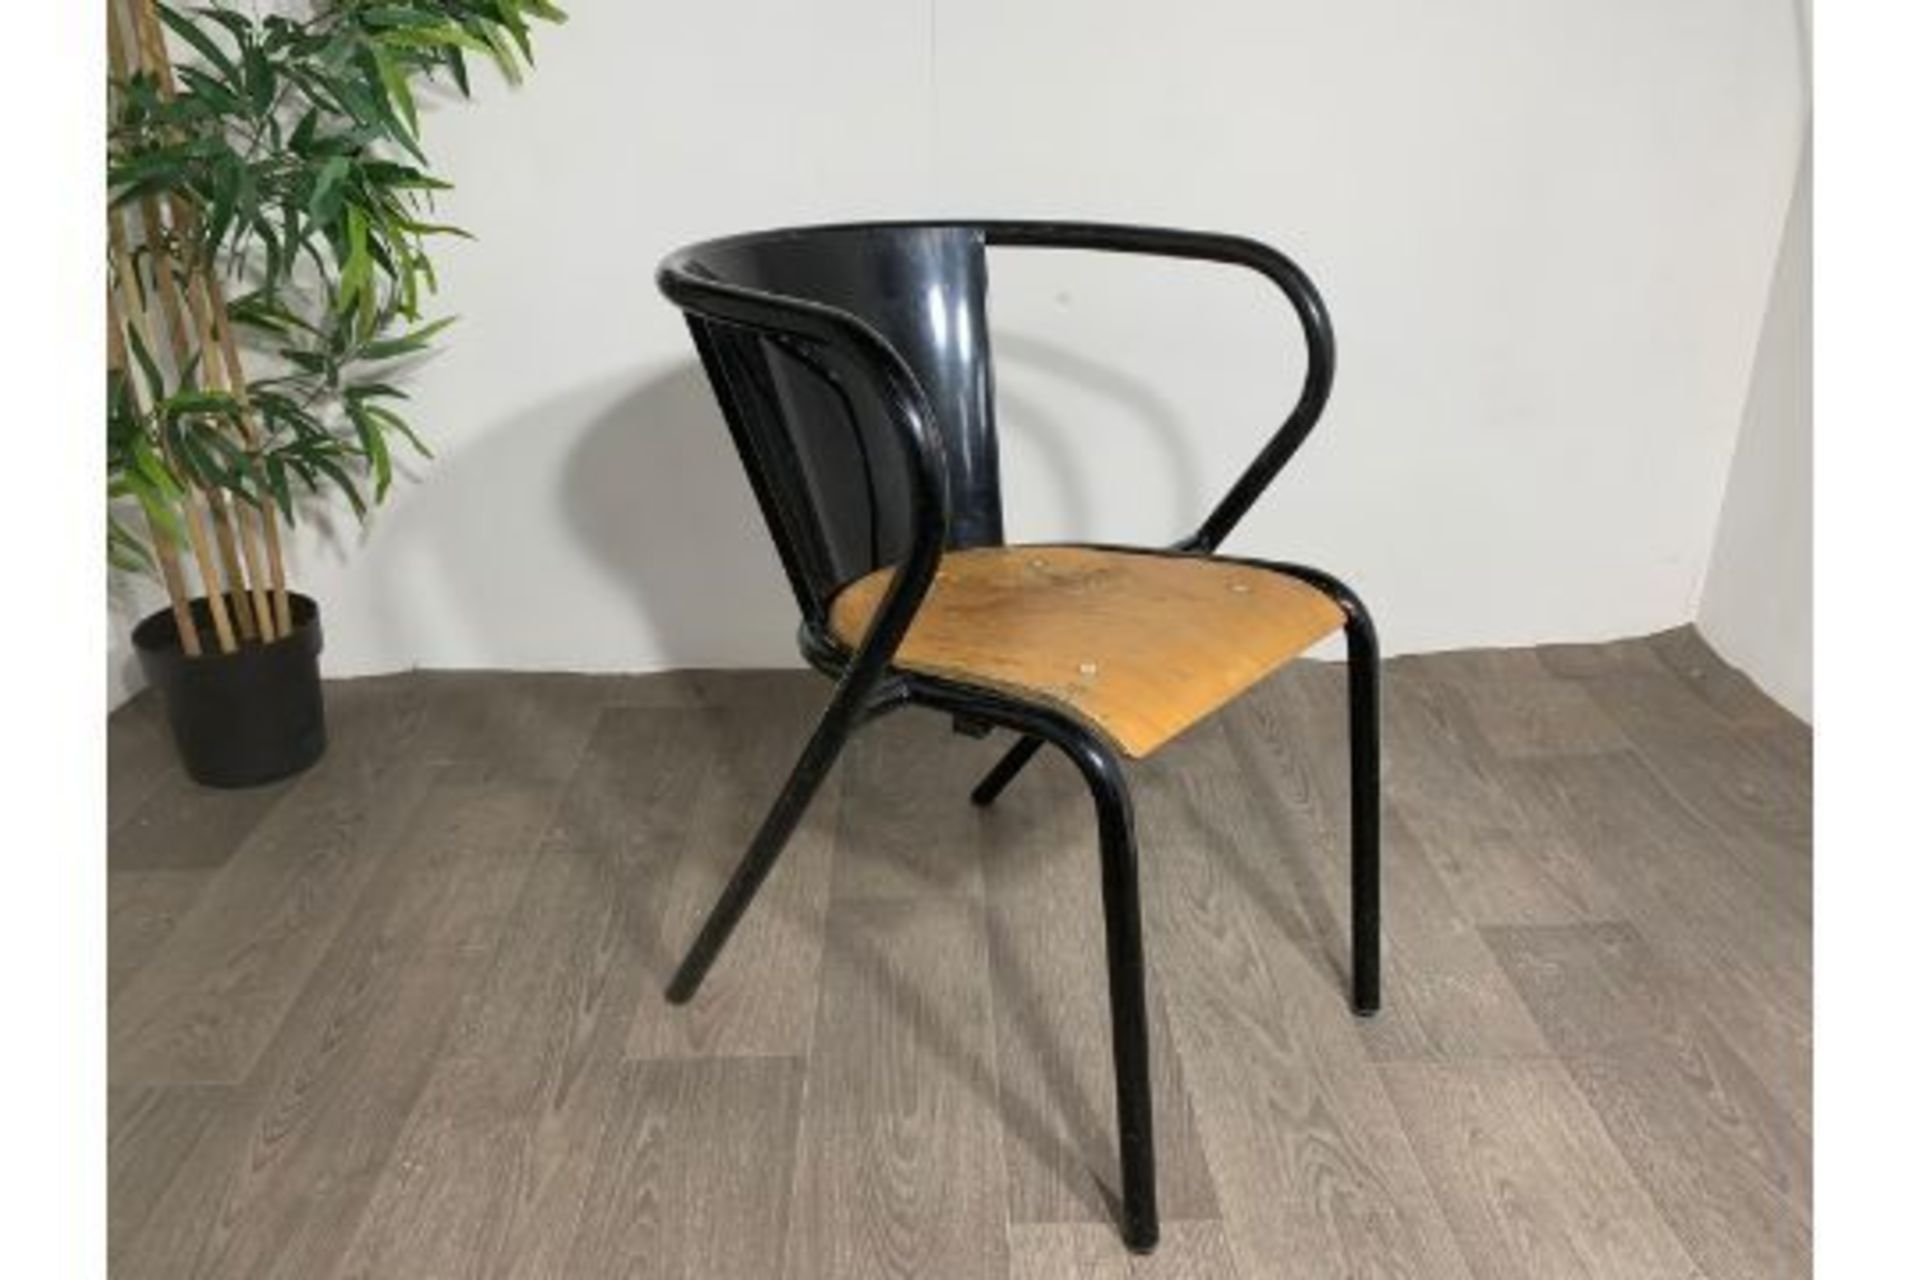 Adico 5008 Black Chair With Wooden Seat x4 - Image 2 of 4